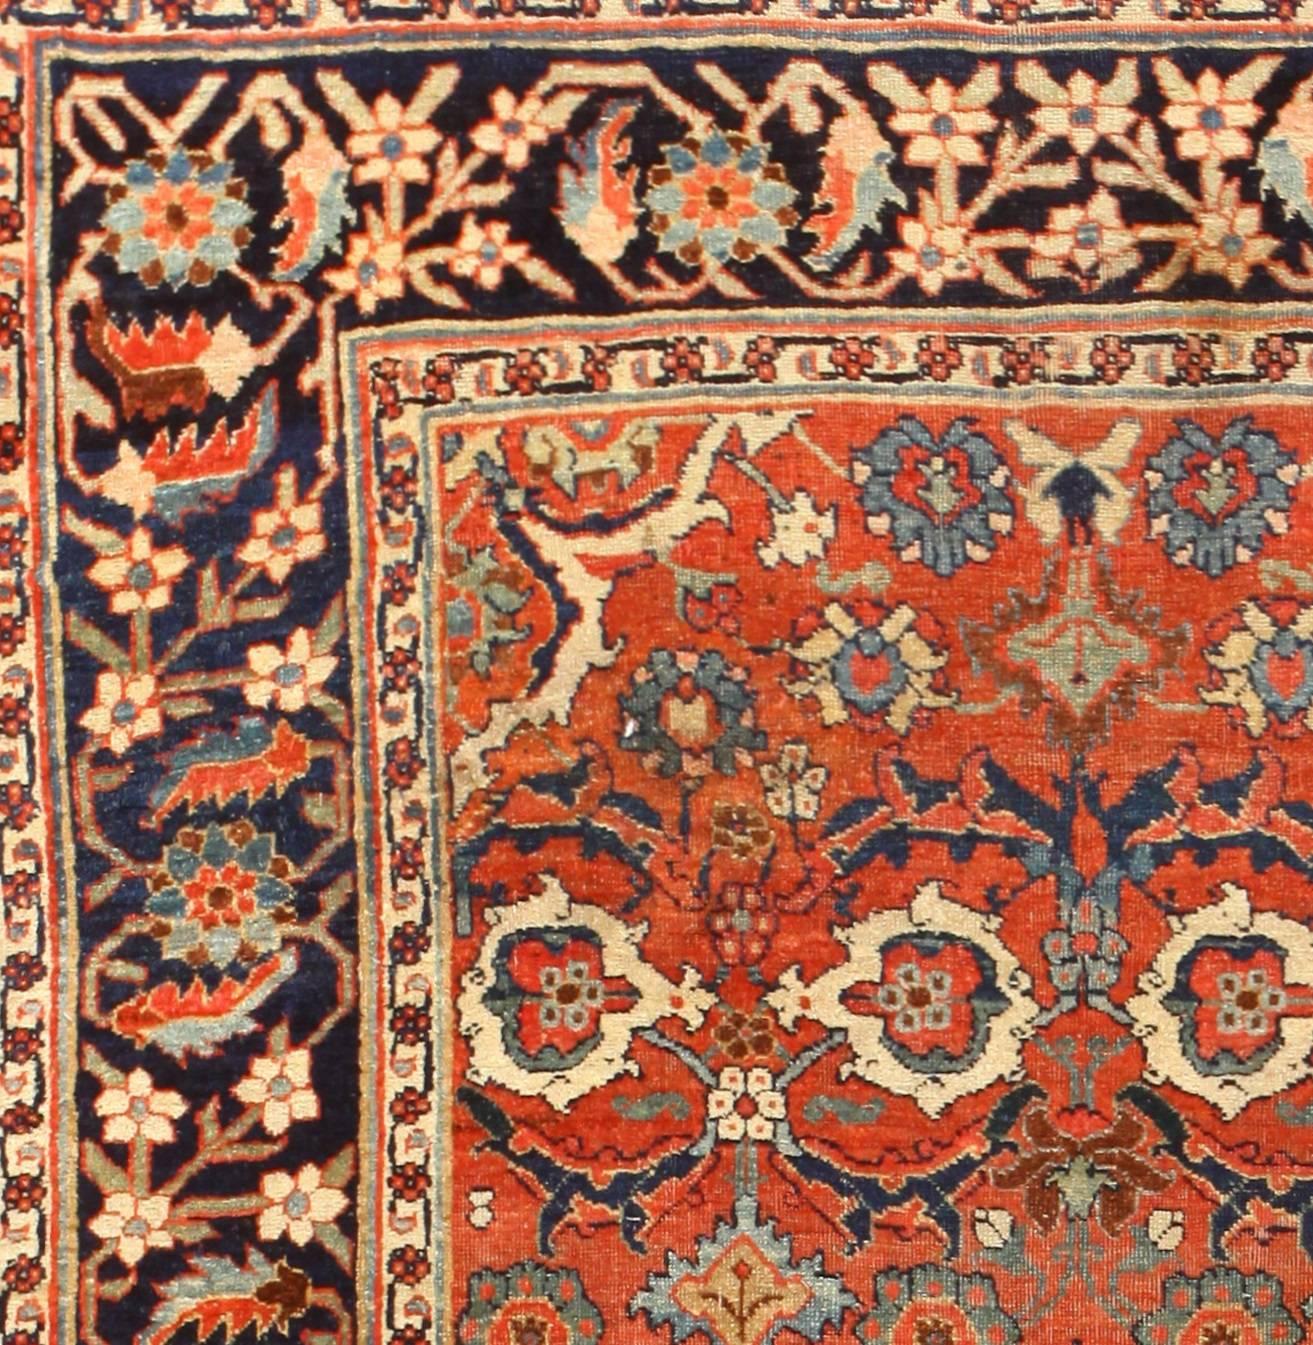 Antique Bidjar rugs, Bidjar is a town in Persian Kurdistan located in north-west Persia. The Bidjar name is also used to describe the antique carpets that were produced in the many villages in the surrounding vicinity. The Bidjar is noted as being